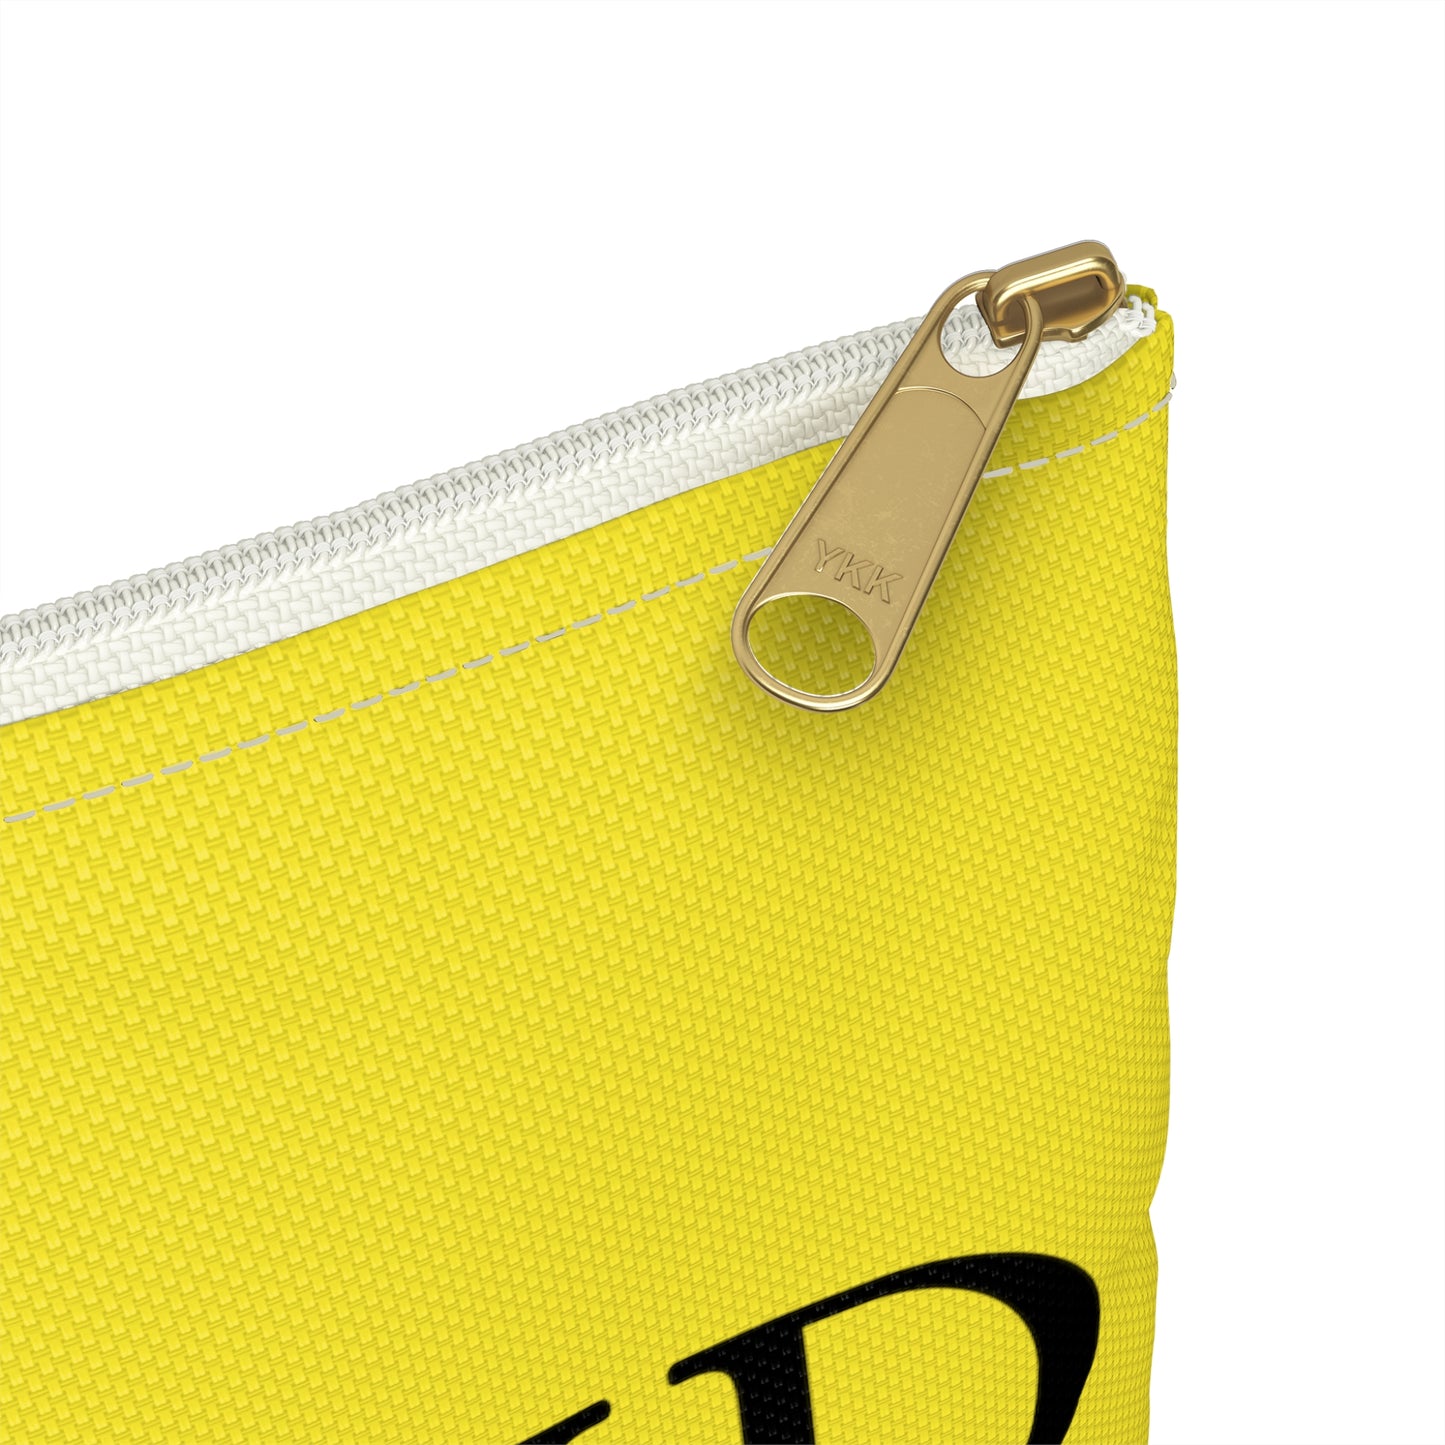 JusKind Accessory Pouch (Yellow)